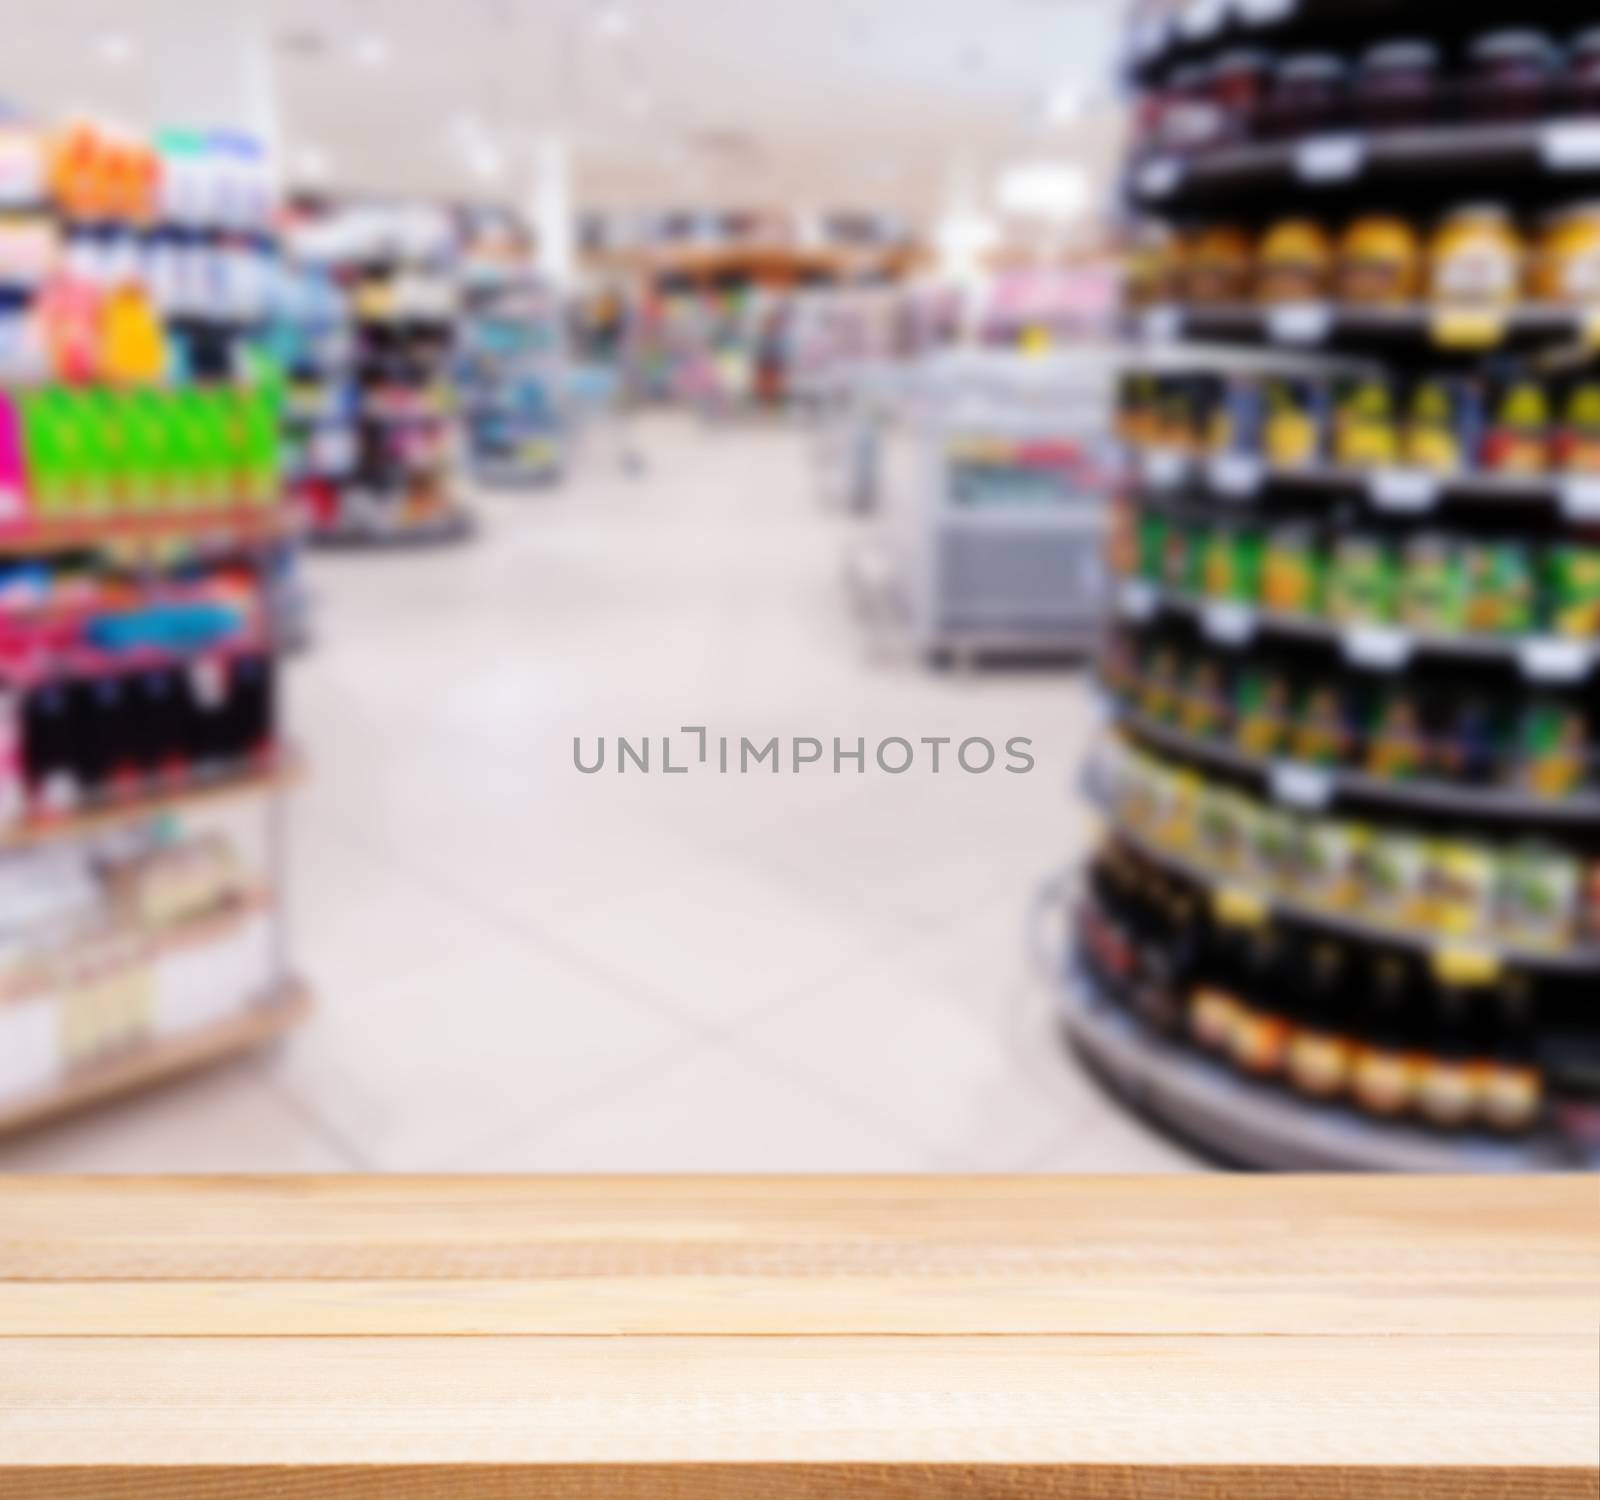 Wooden board empty table in front of blurred background. Perspective light wood over blur in supermarket - can be used for display or montage your products. Mock up for display of product.